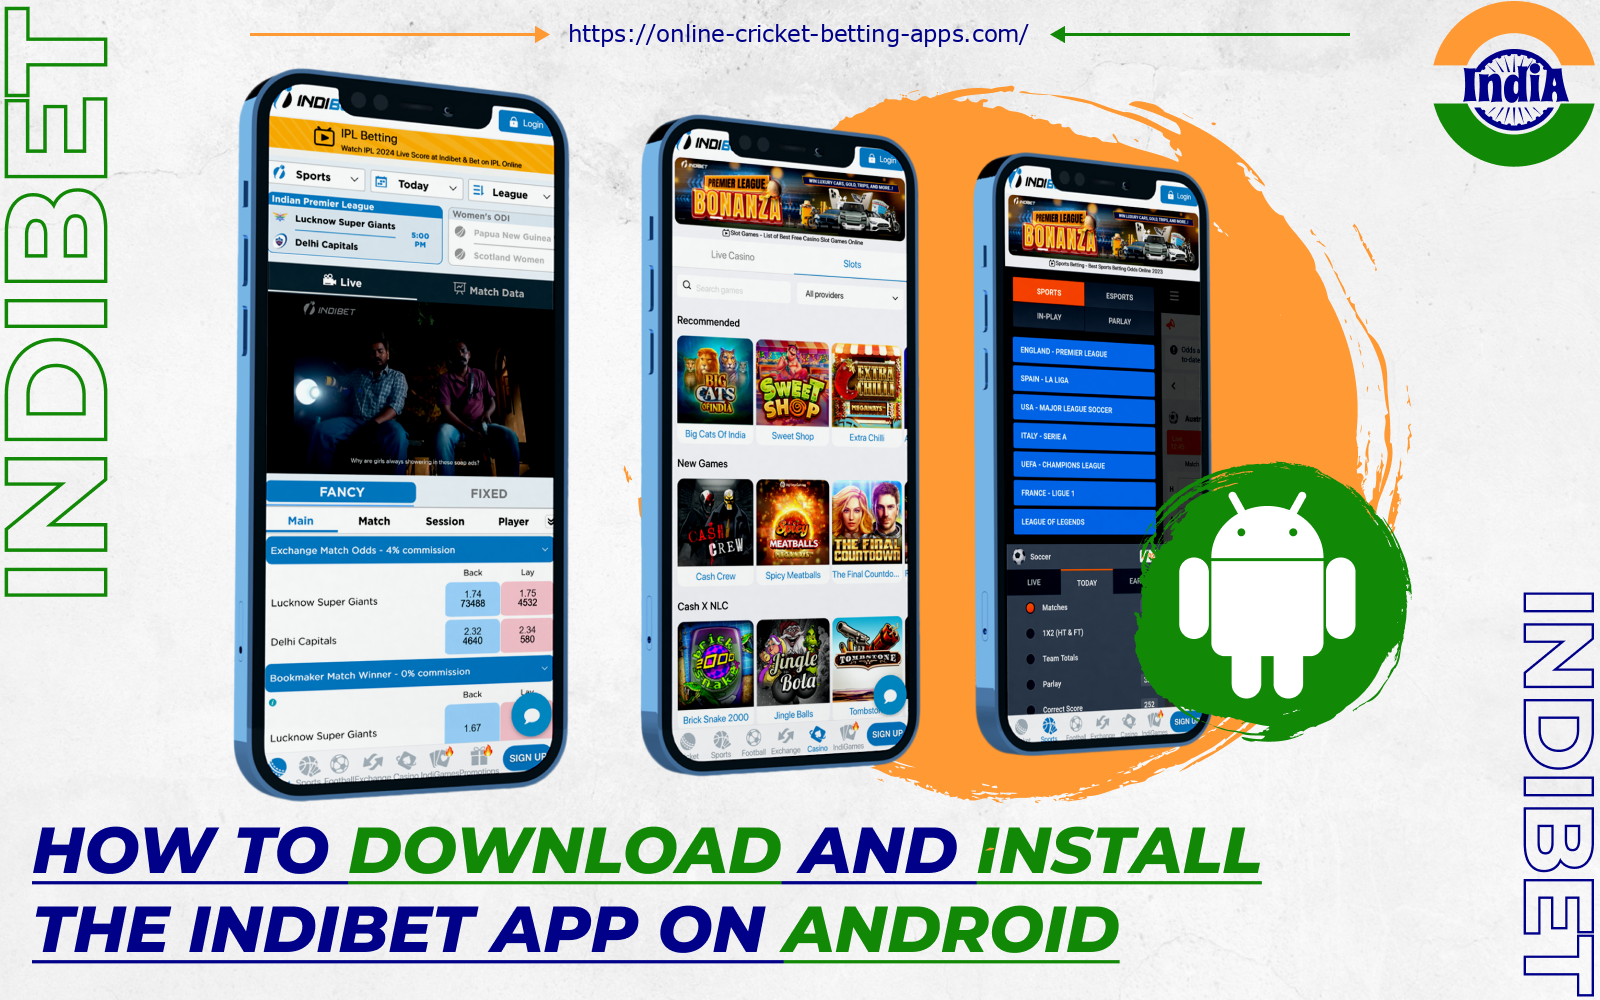 After installing the free Indibet app for Android, Indian bettors will be able to enjoy cricket betting, slots and casino games